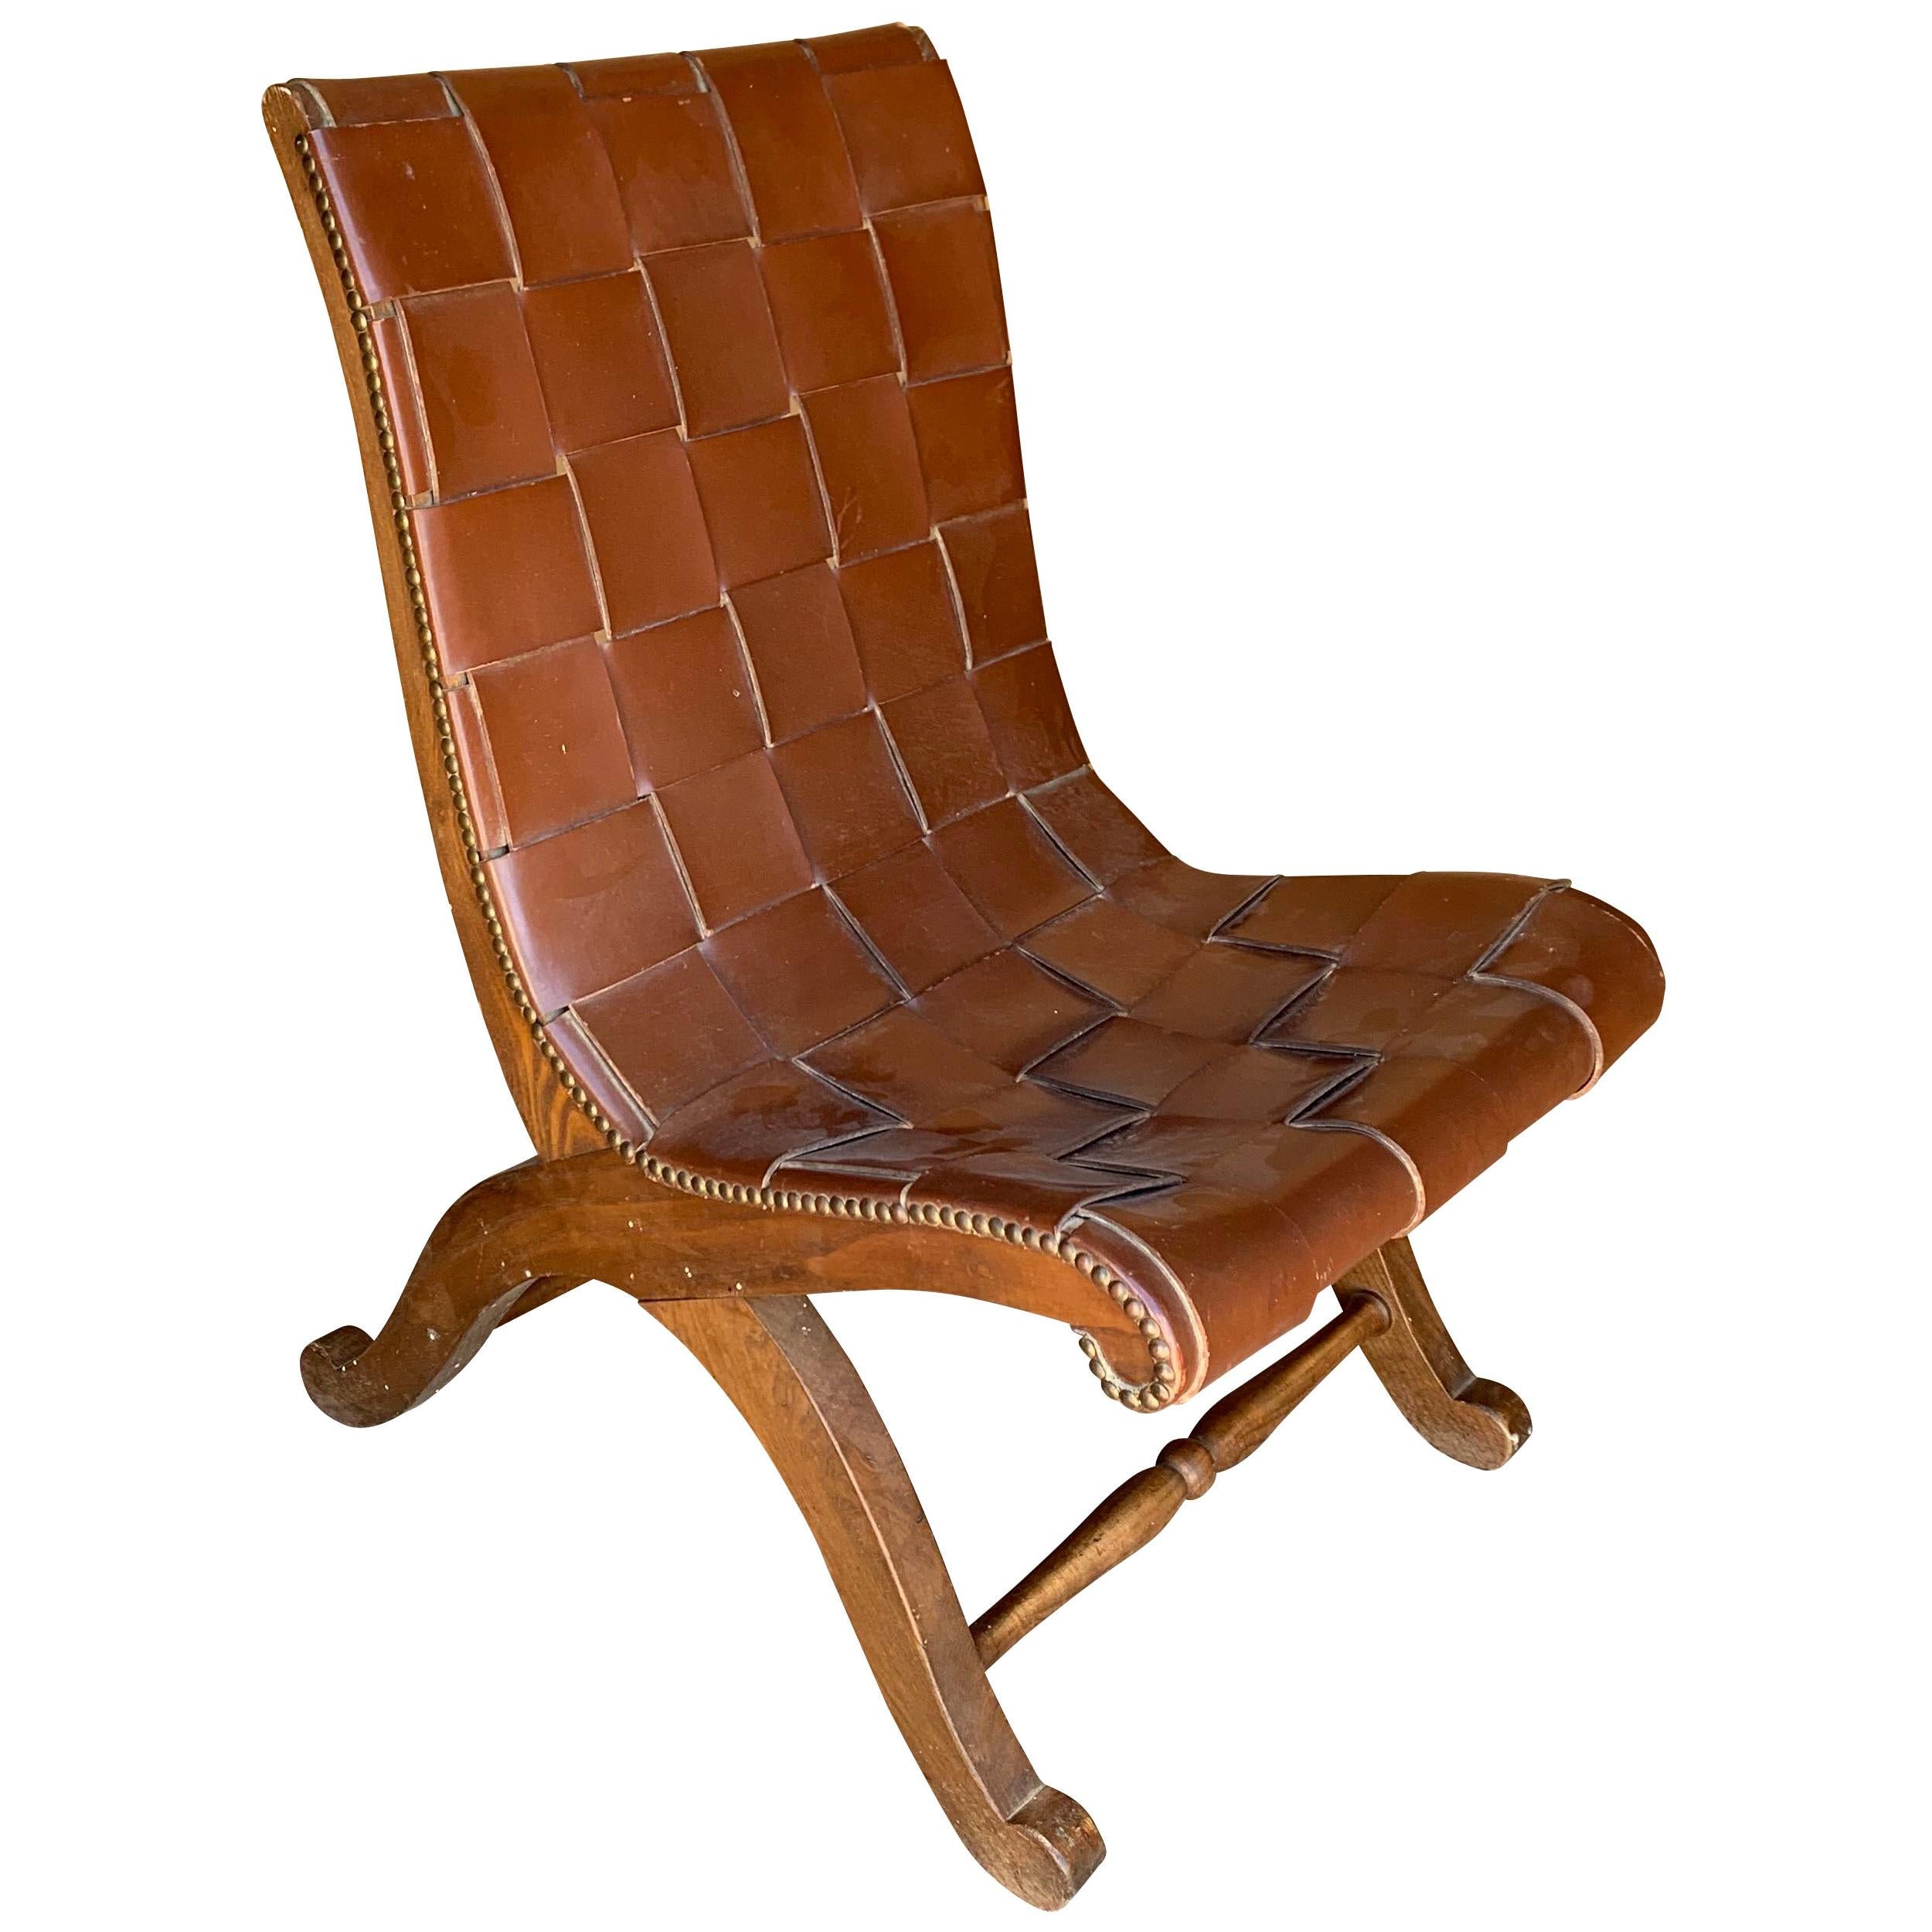 Valenti Brown Woven Leather Chair, Spain, Midcentury